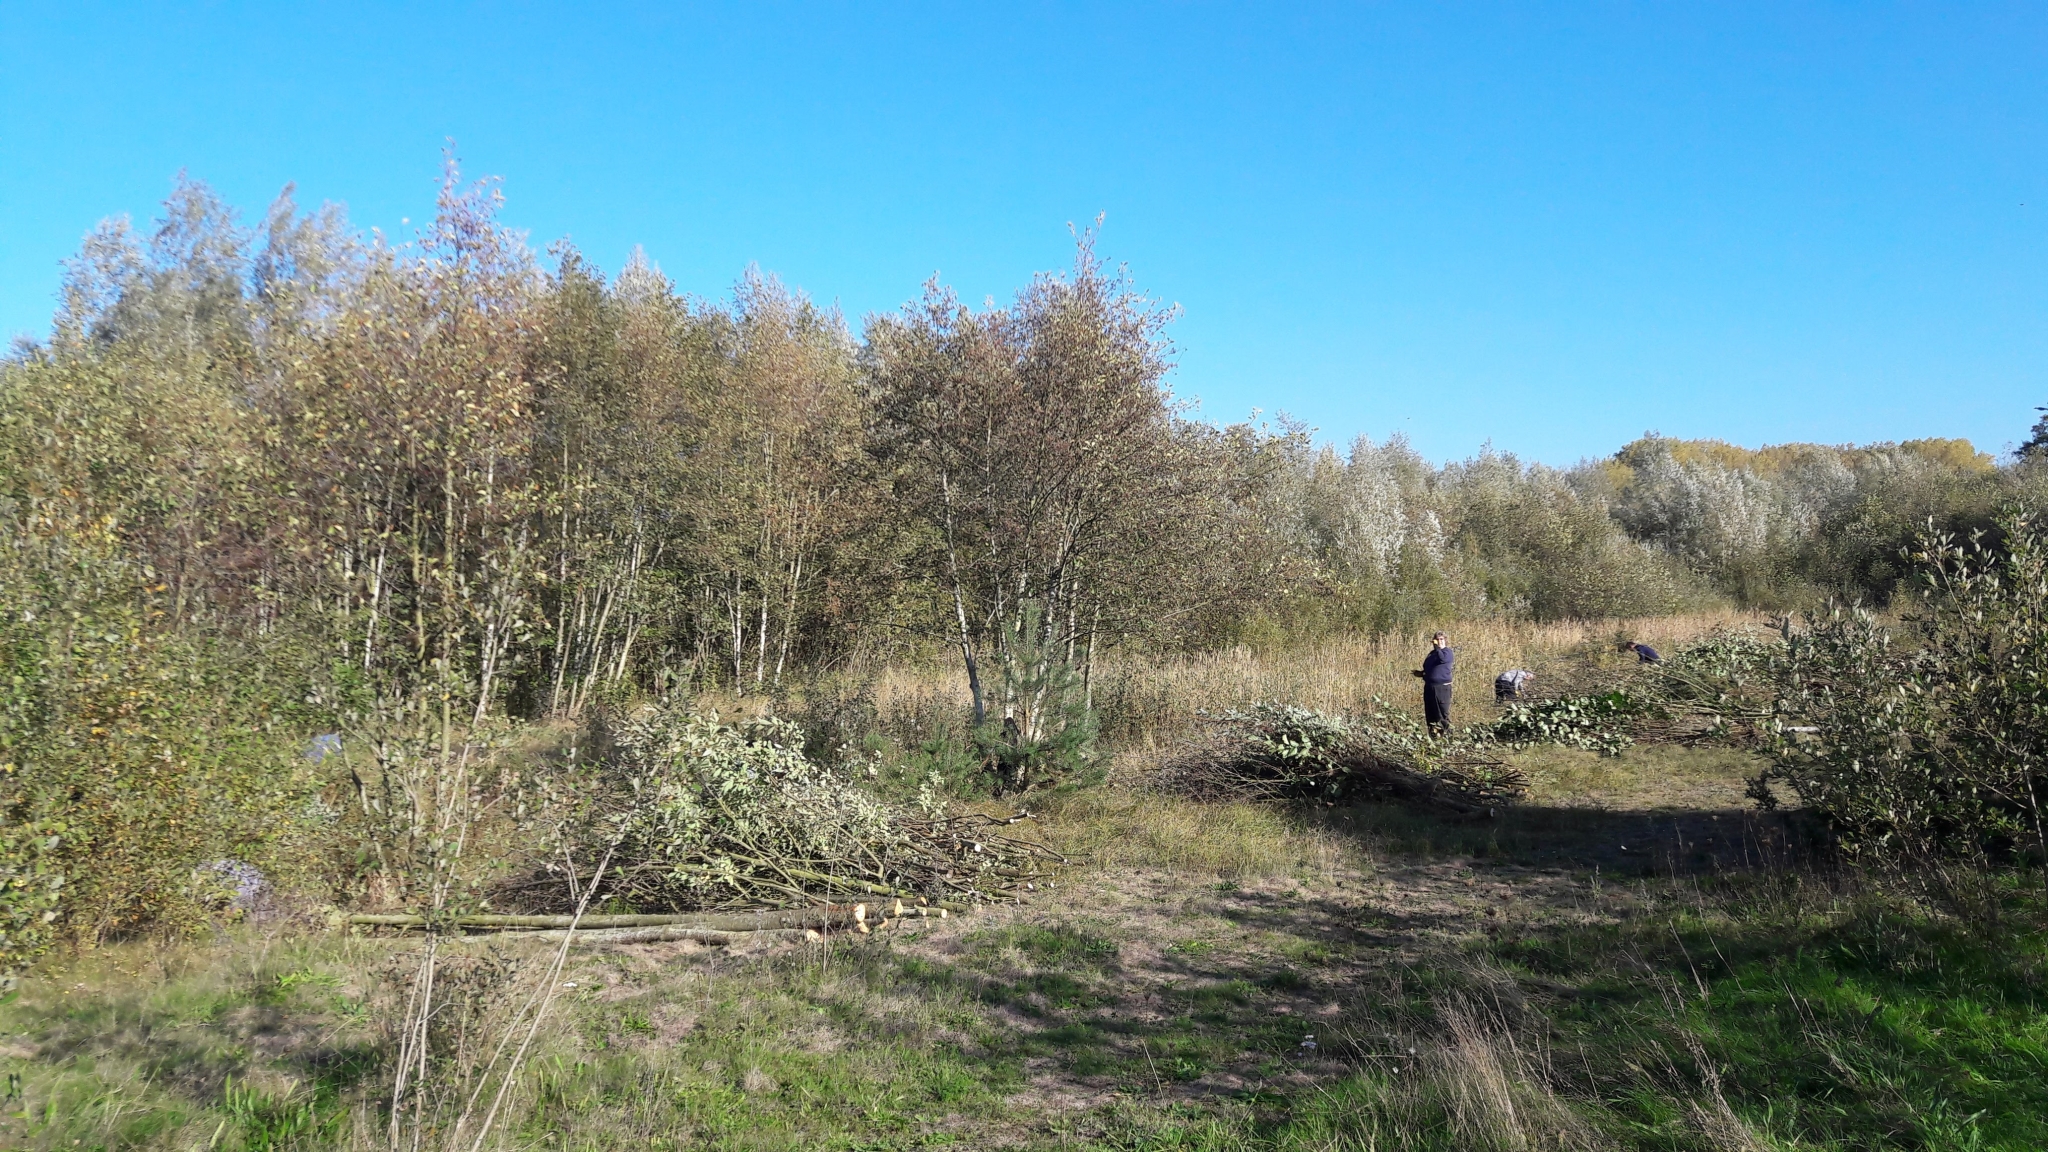 A photo from the FoTF Conservation Event - October 2018 - Undetaking clearance at the Lynford Lake Waters Edge : The team at work at the waters edge of Lynford Lake